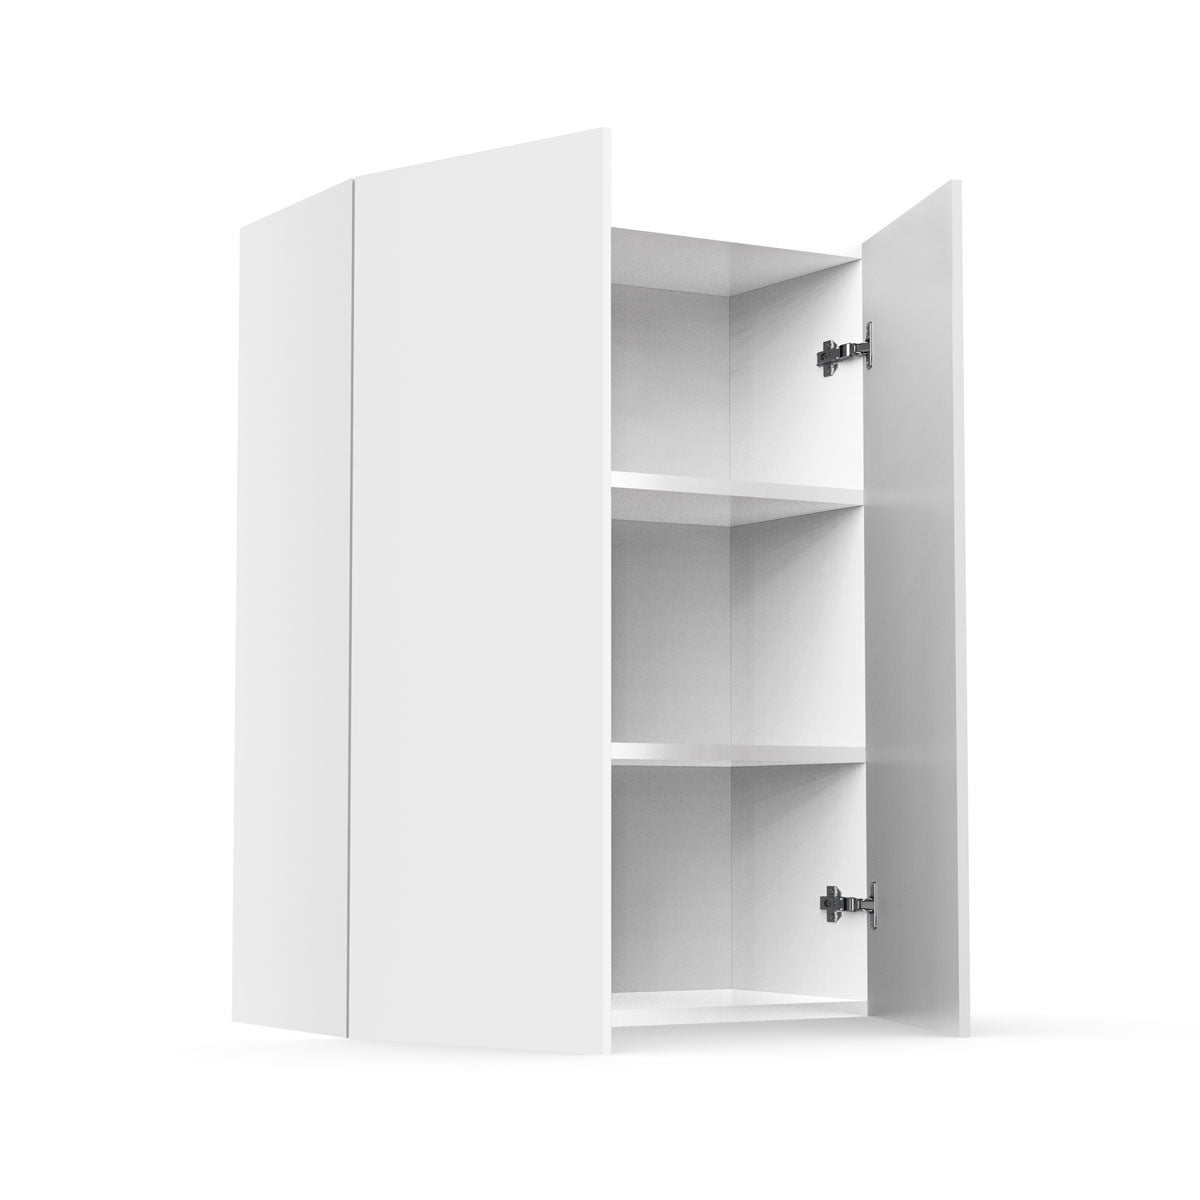 RTA - Glossy White - Single Door Wall Cabinets | 24"W x 36"H x 12"D